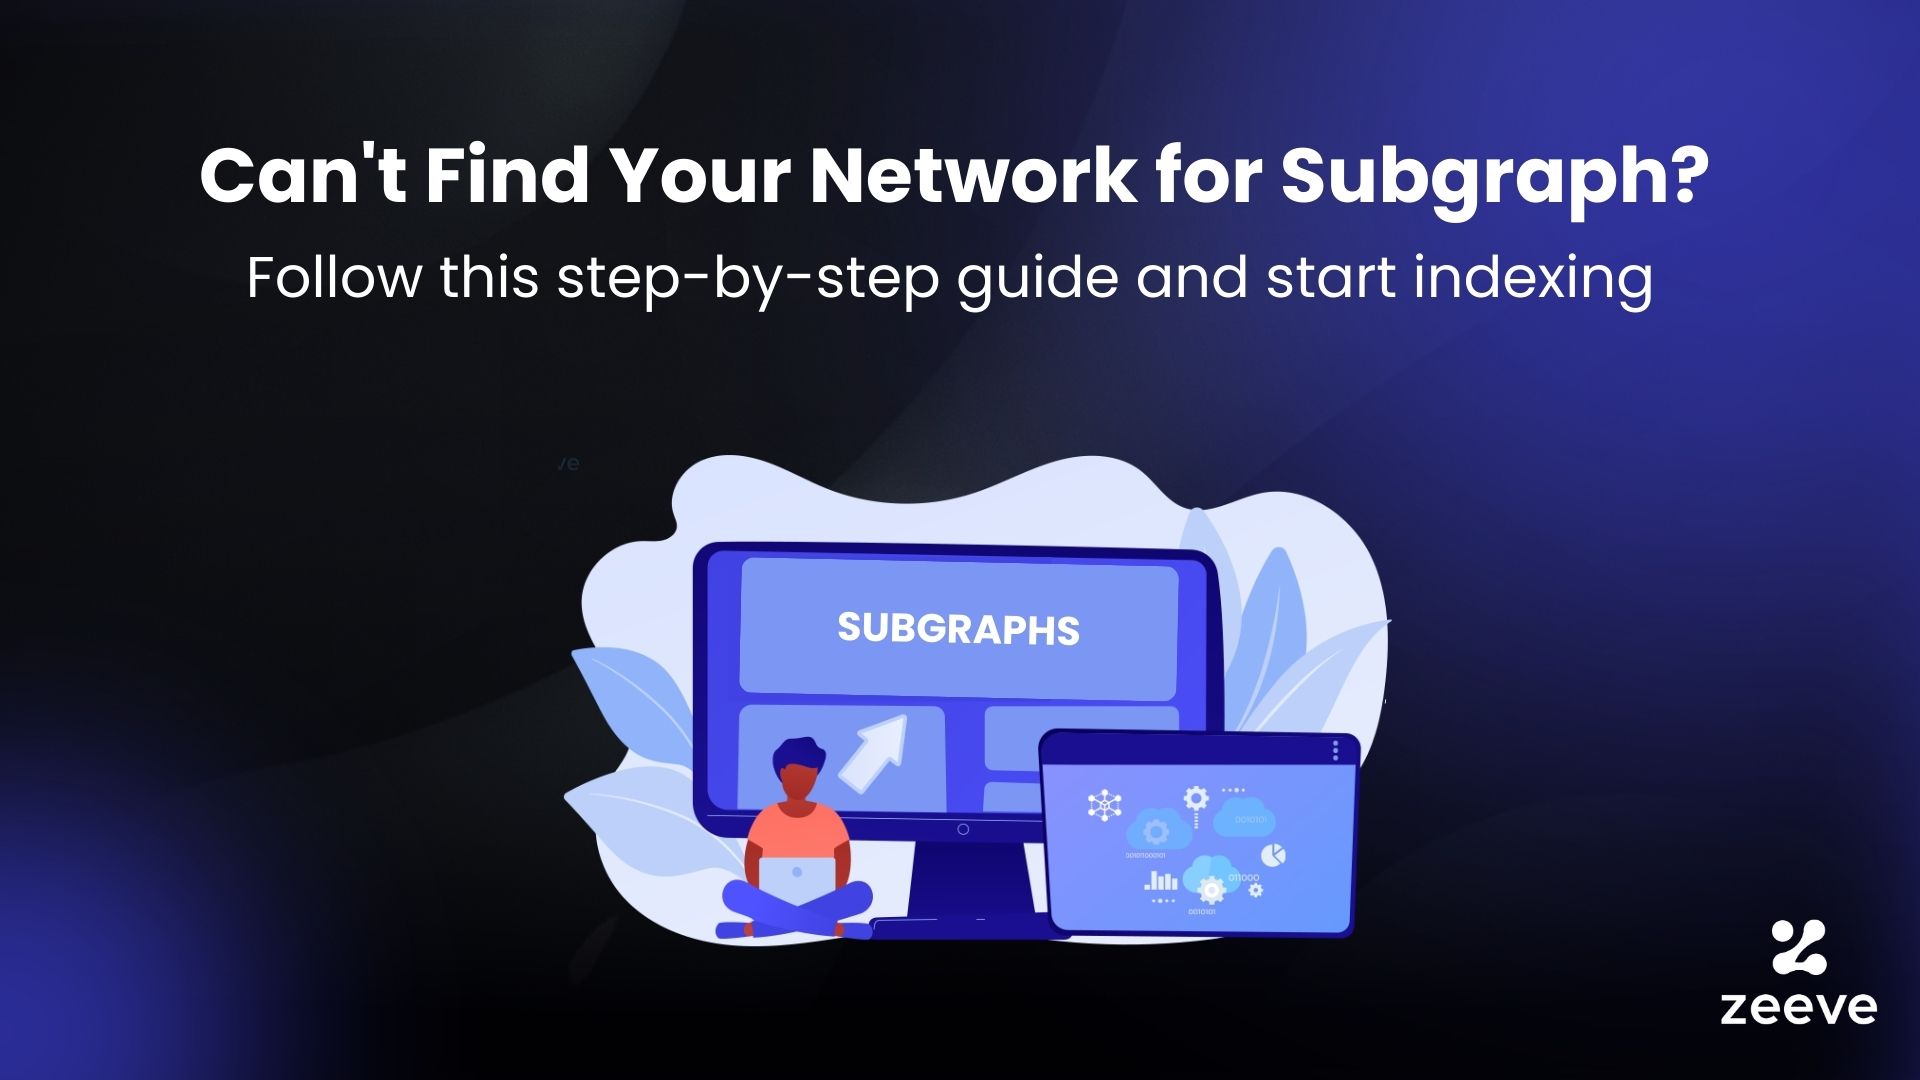 How to index Network for your Subgraph